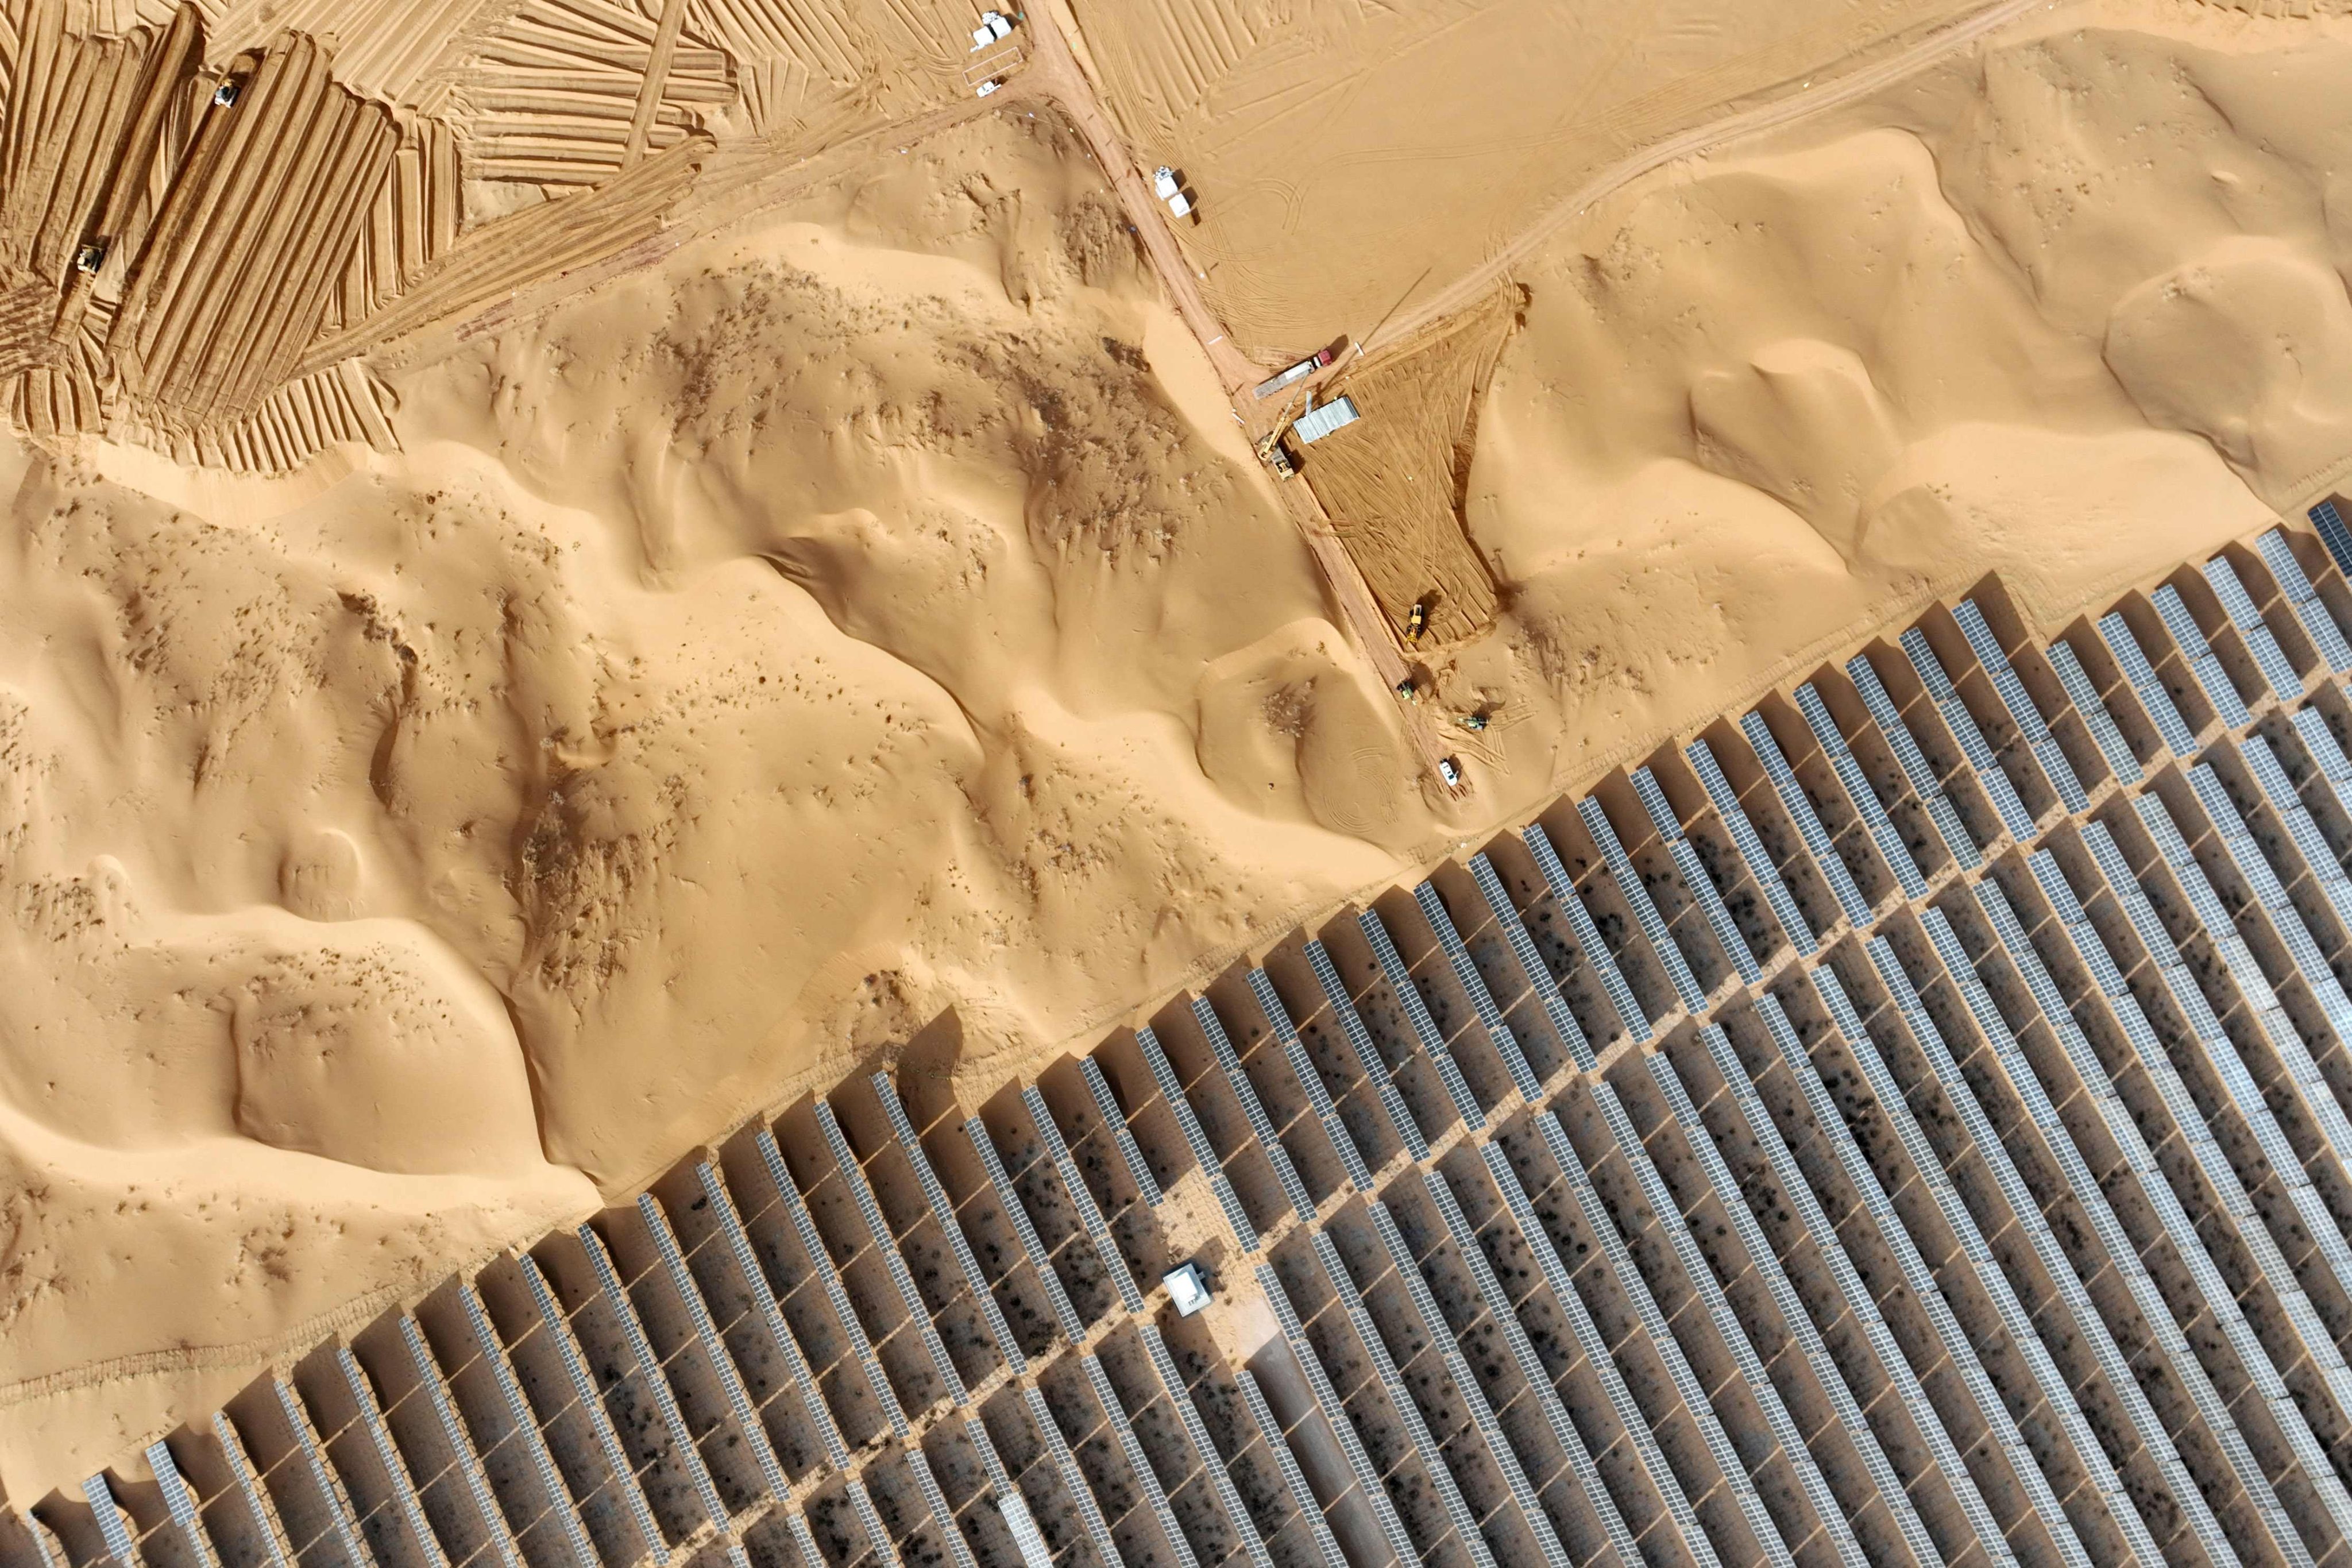 Vehicles are seen near solar panels during construction at the Ningxia Tengger Desert New Energy Base, in China’s northern Ningxia region, on December 9. Photo: AFP